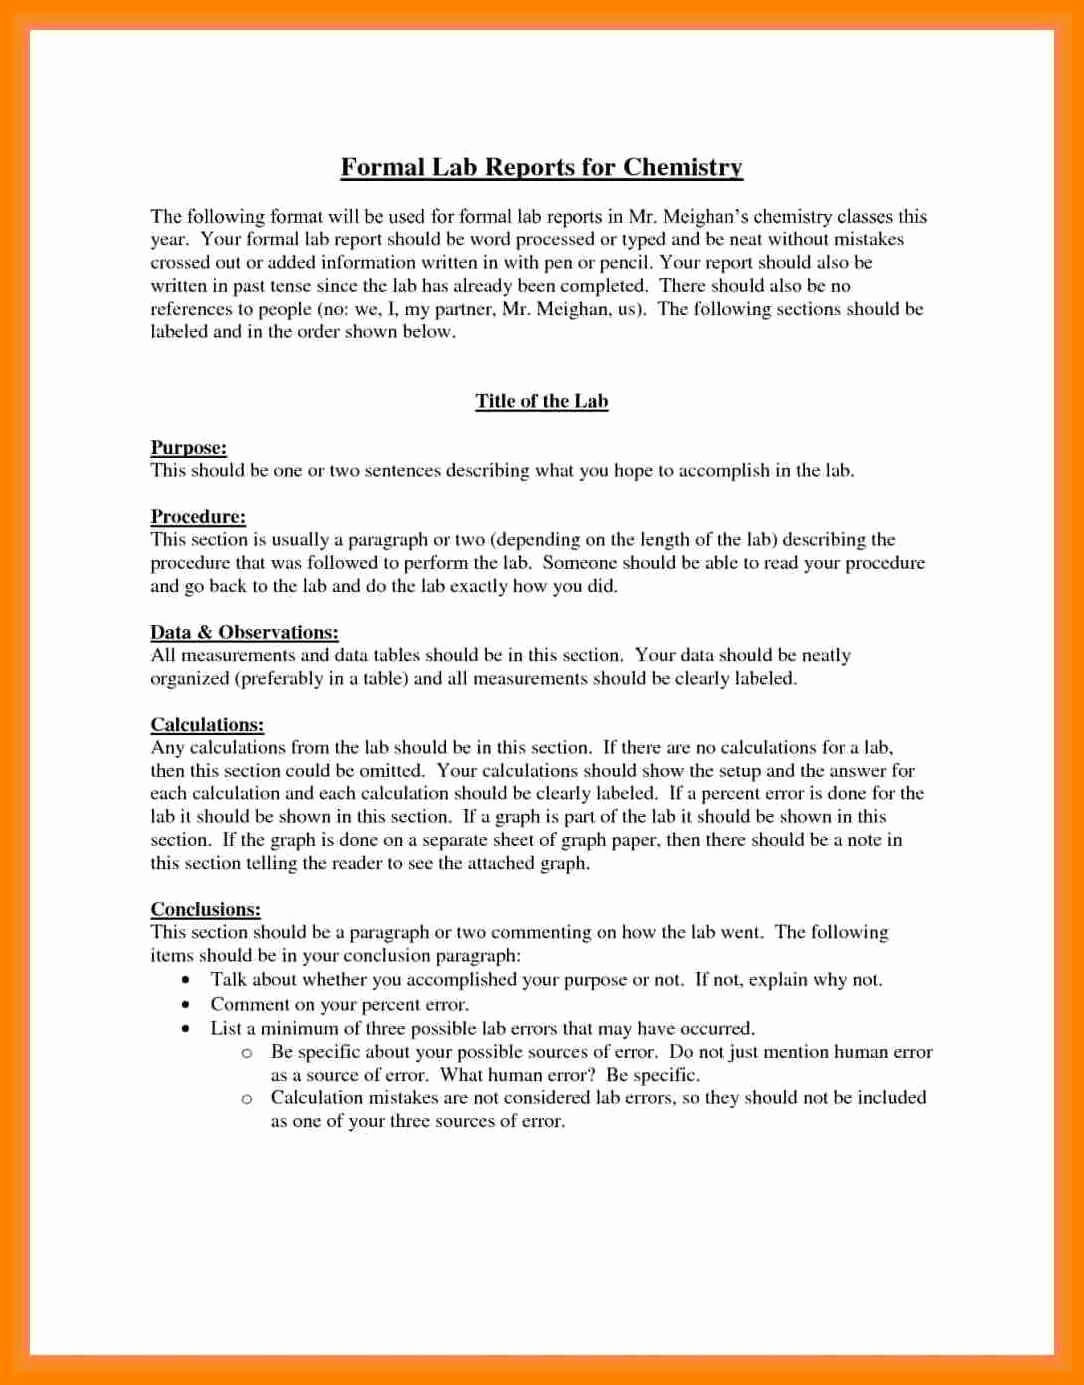 003 Formal Lab Report Example Best Write Up Template Of Inside Lab Report Template Chemistry